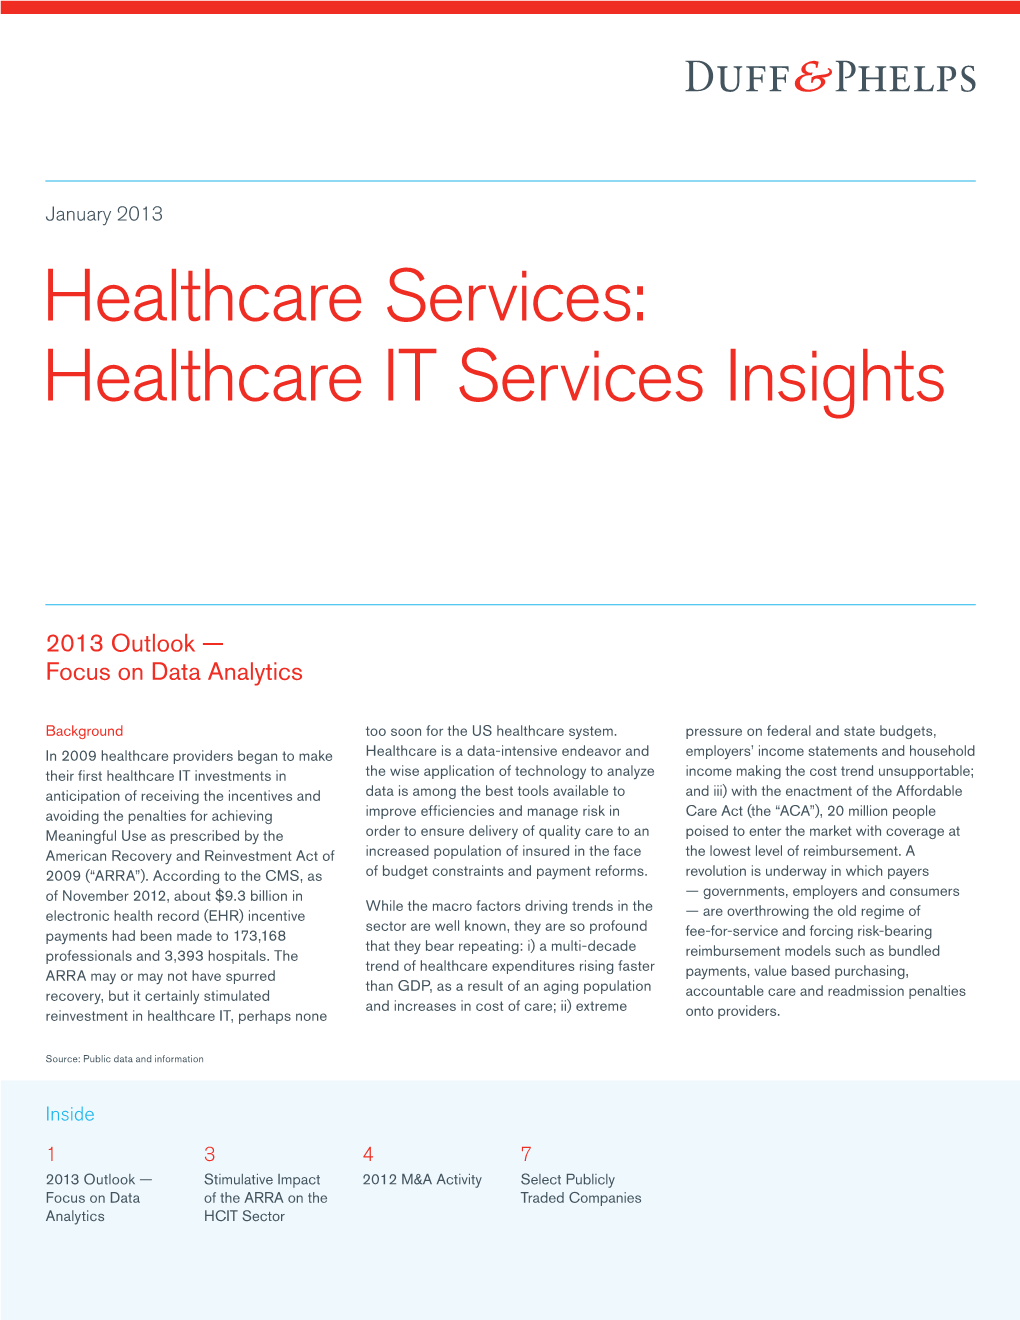 Healthcare Services: Healthcare IT Services Insights